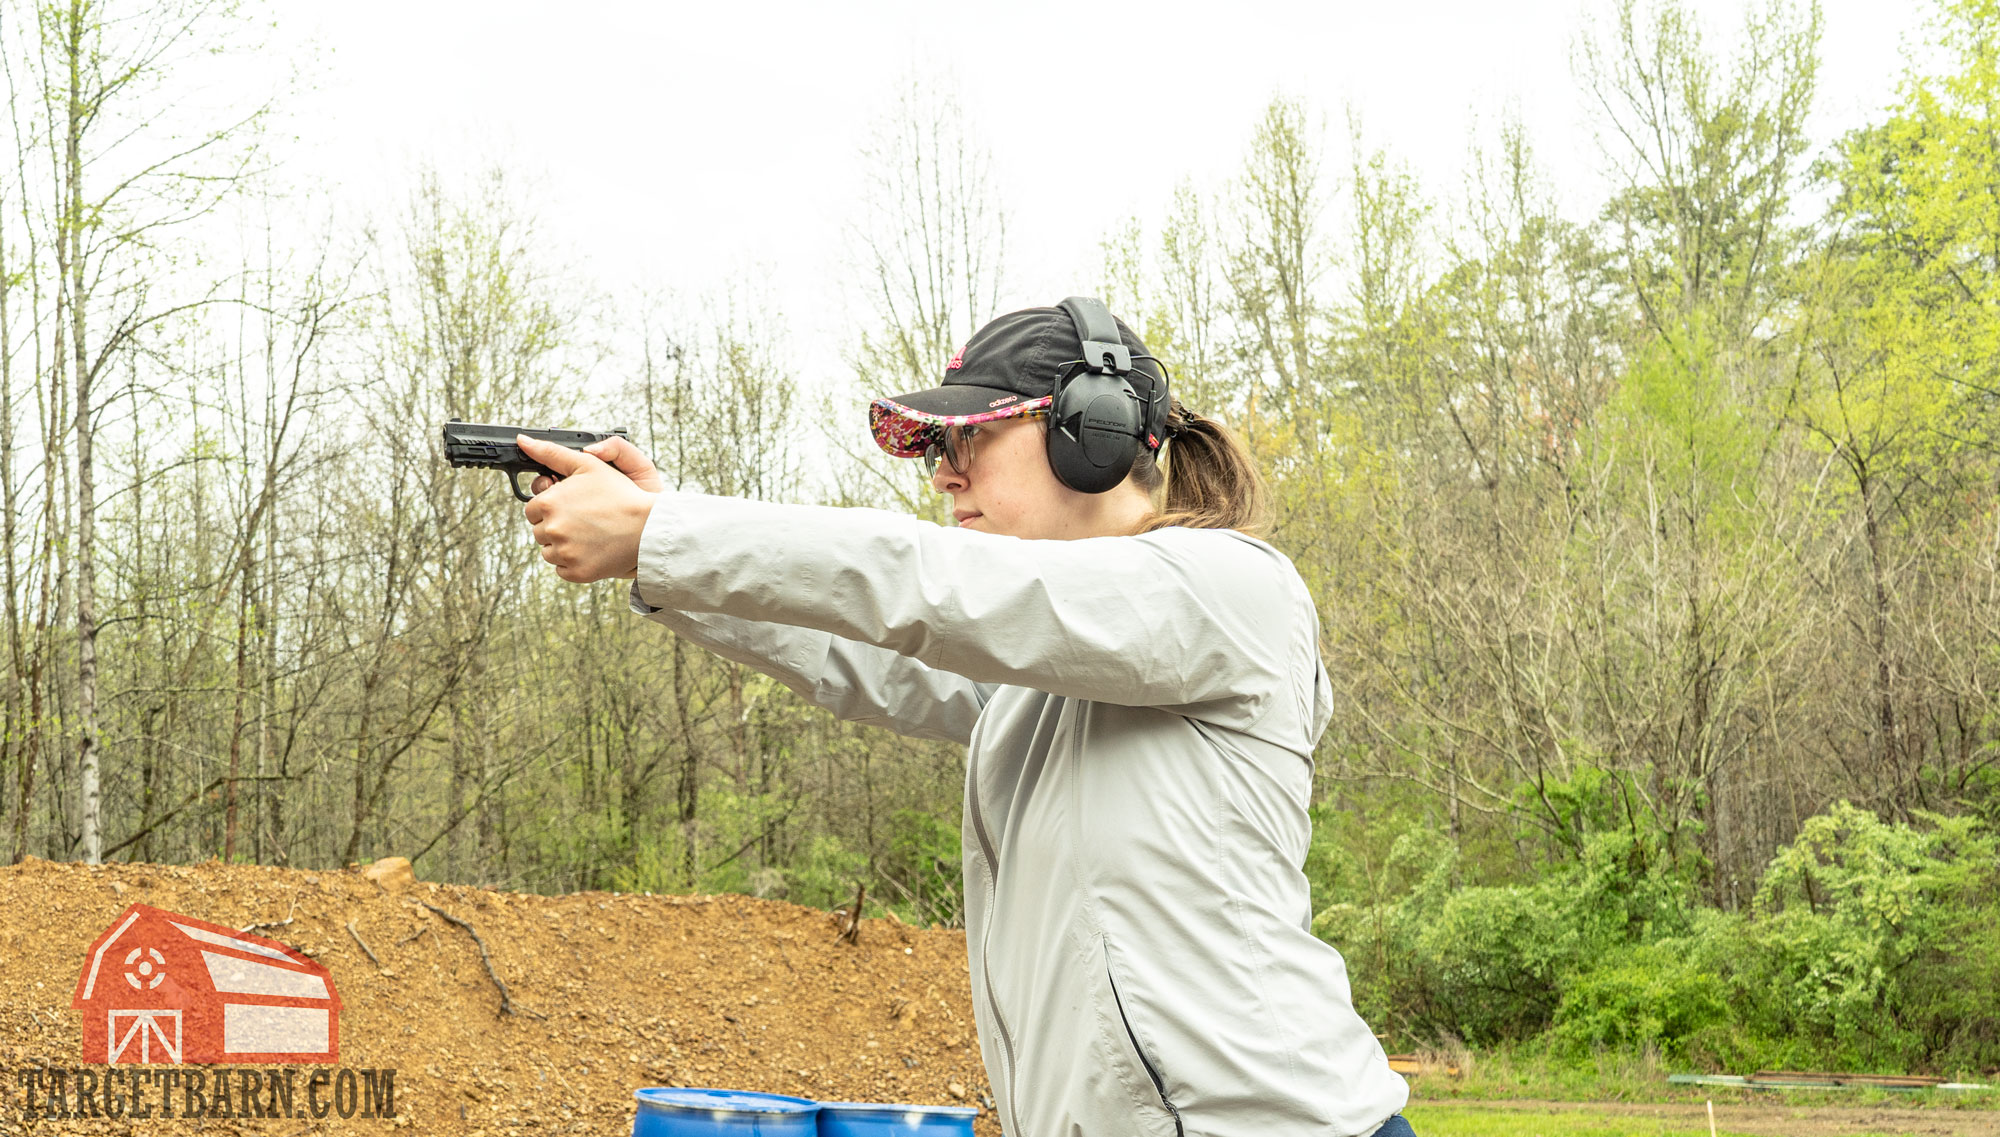 the author shooting a smith & wesson m&p shield ez 380 at the range